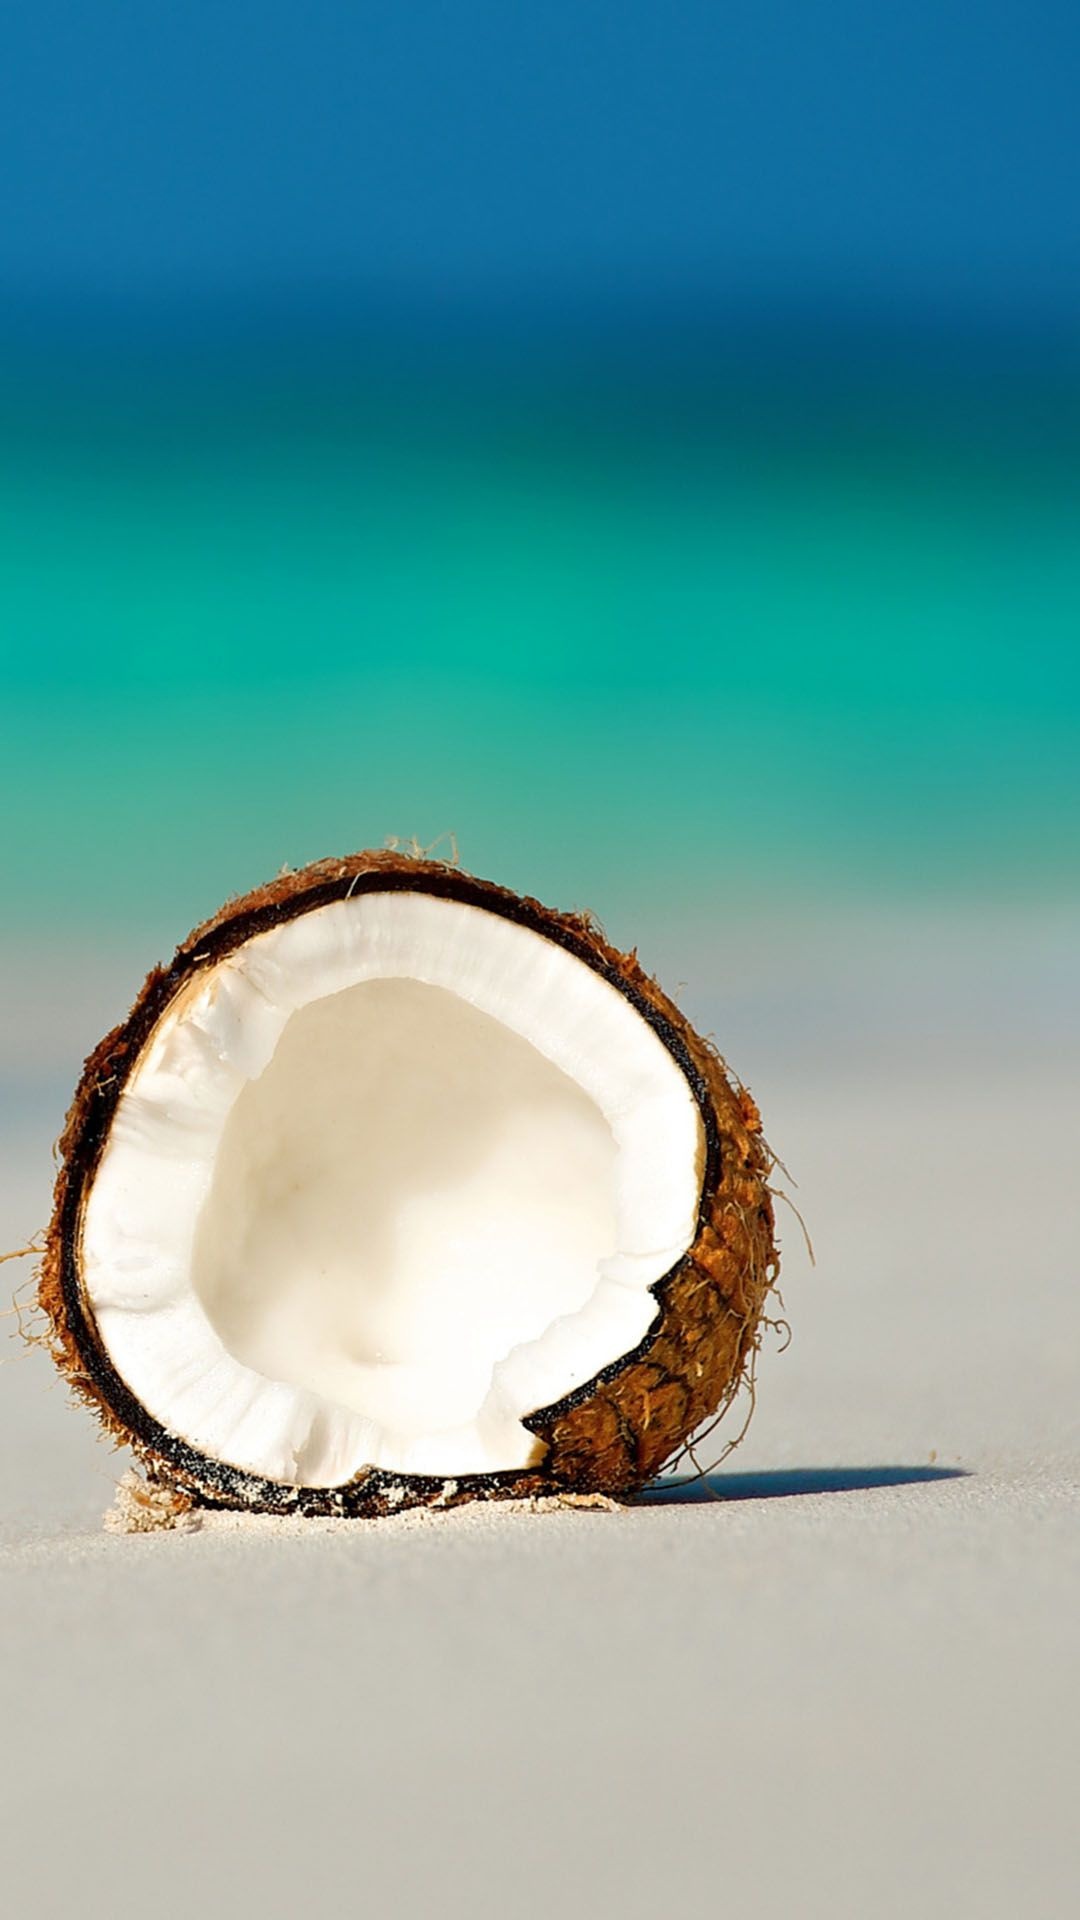 Coconut: Contains minerals and nutrients such as potassium, sodium, manganese, vitamin B, copper, and iron. 1080x1920 Full HD Background.